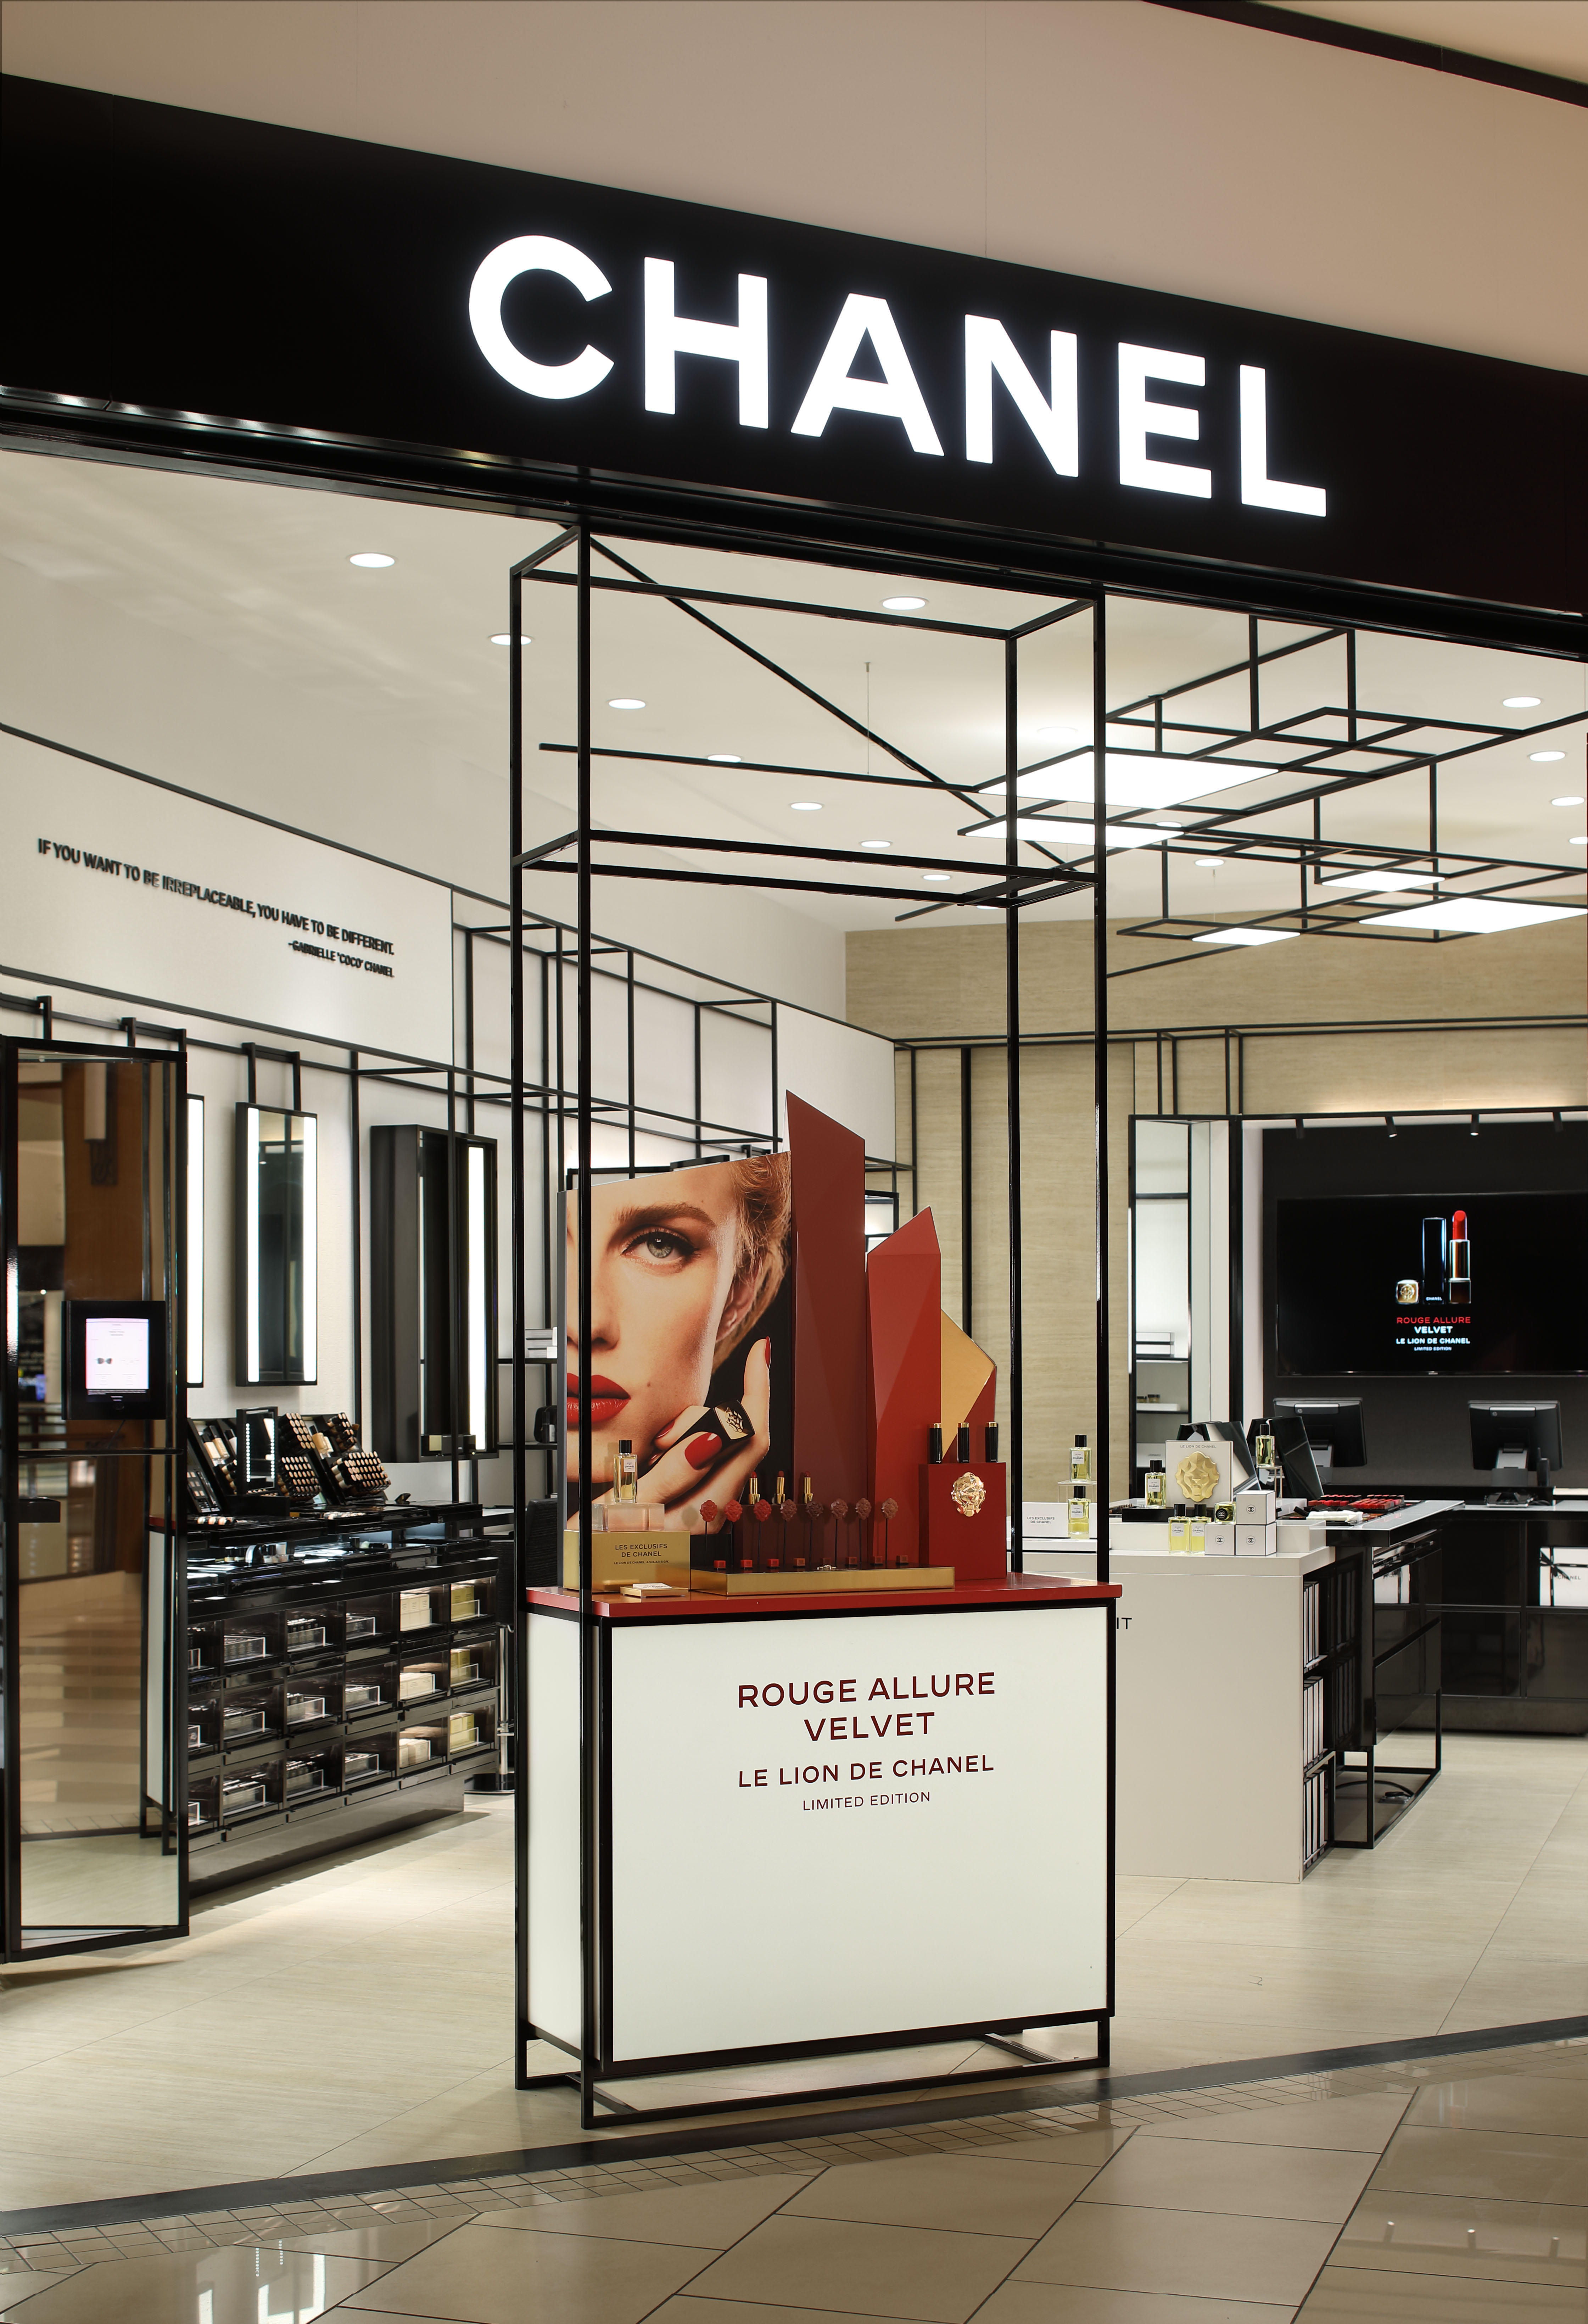 CHANEL FRAGRANCE AND BEAUTY BOUTIQUE, Aventura